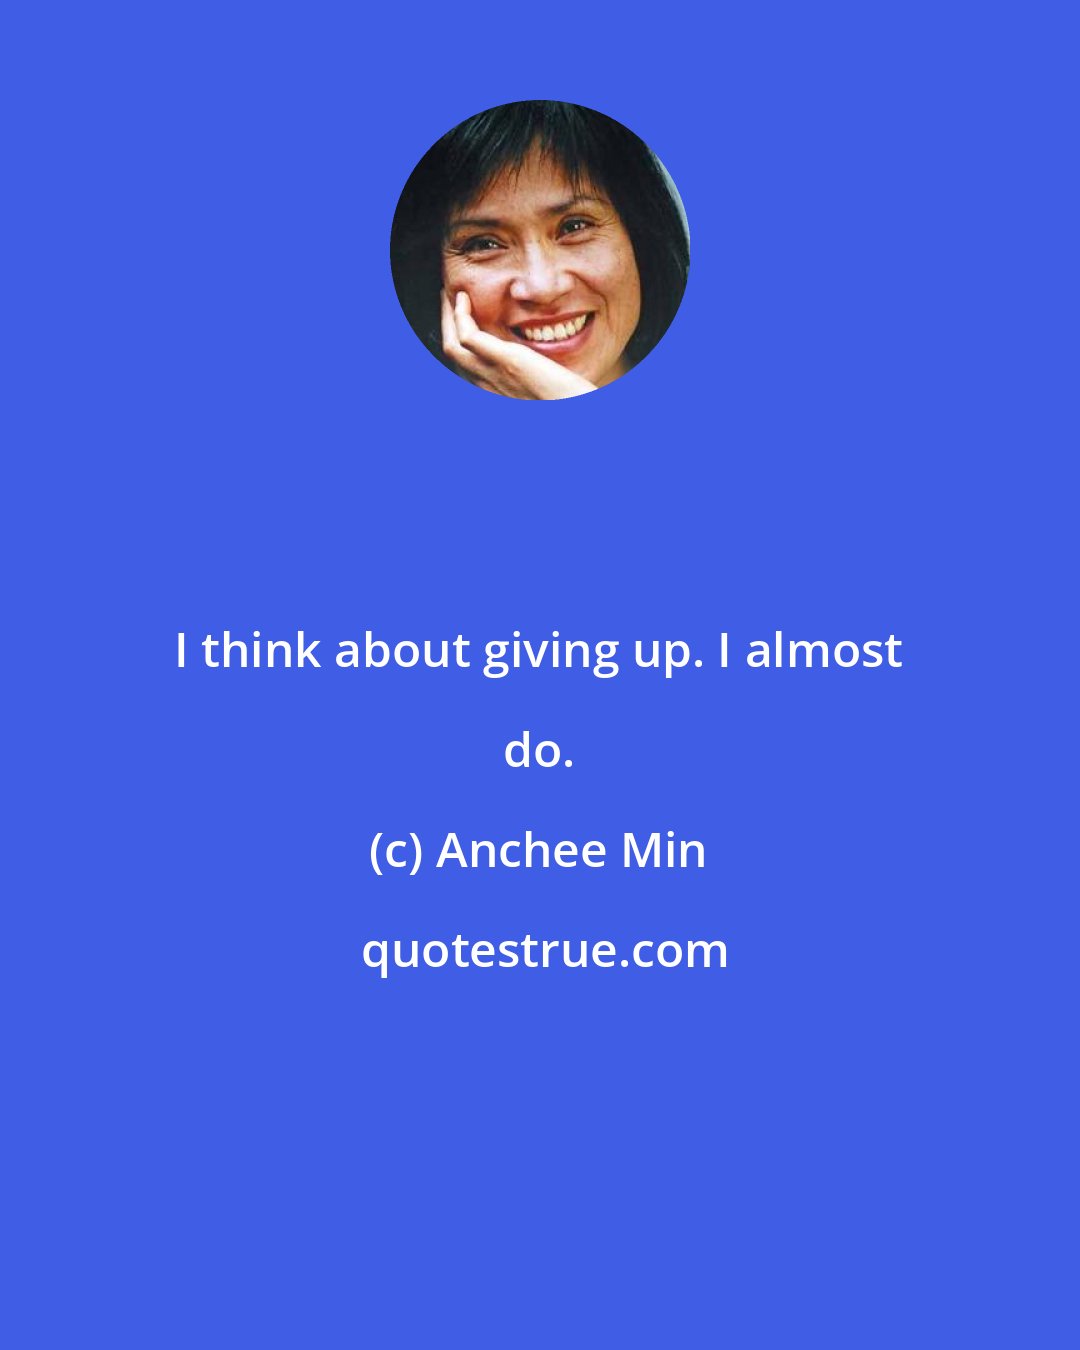 Anchee Min: I think about giving up. I almost do.